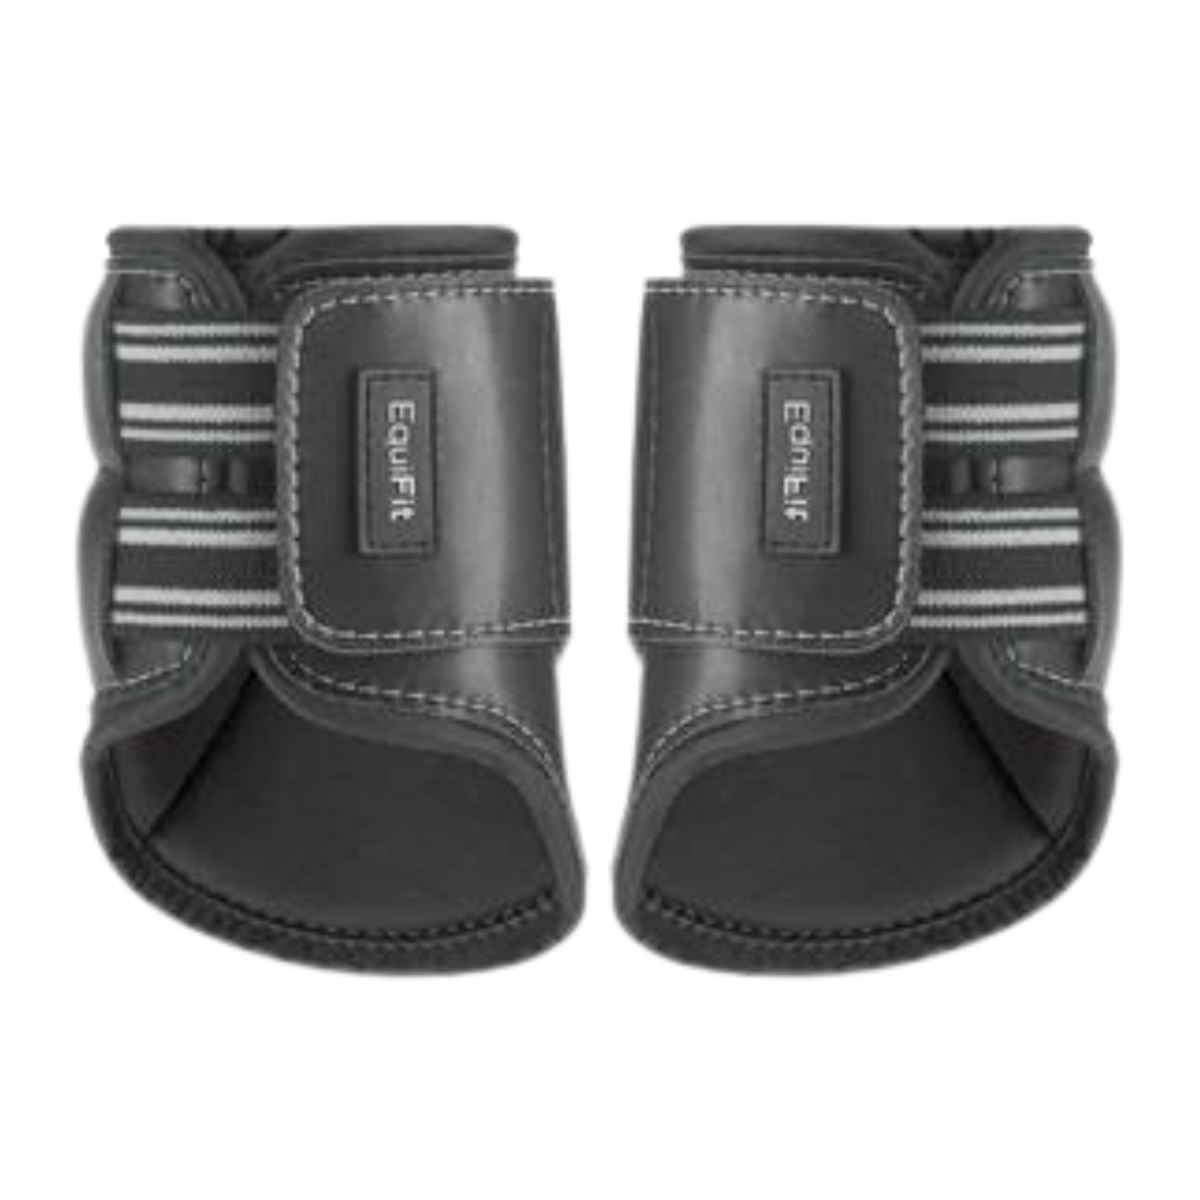 Equifit MultiTeq Hind Boots in Black - XL